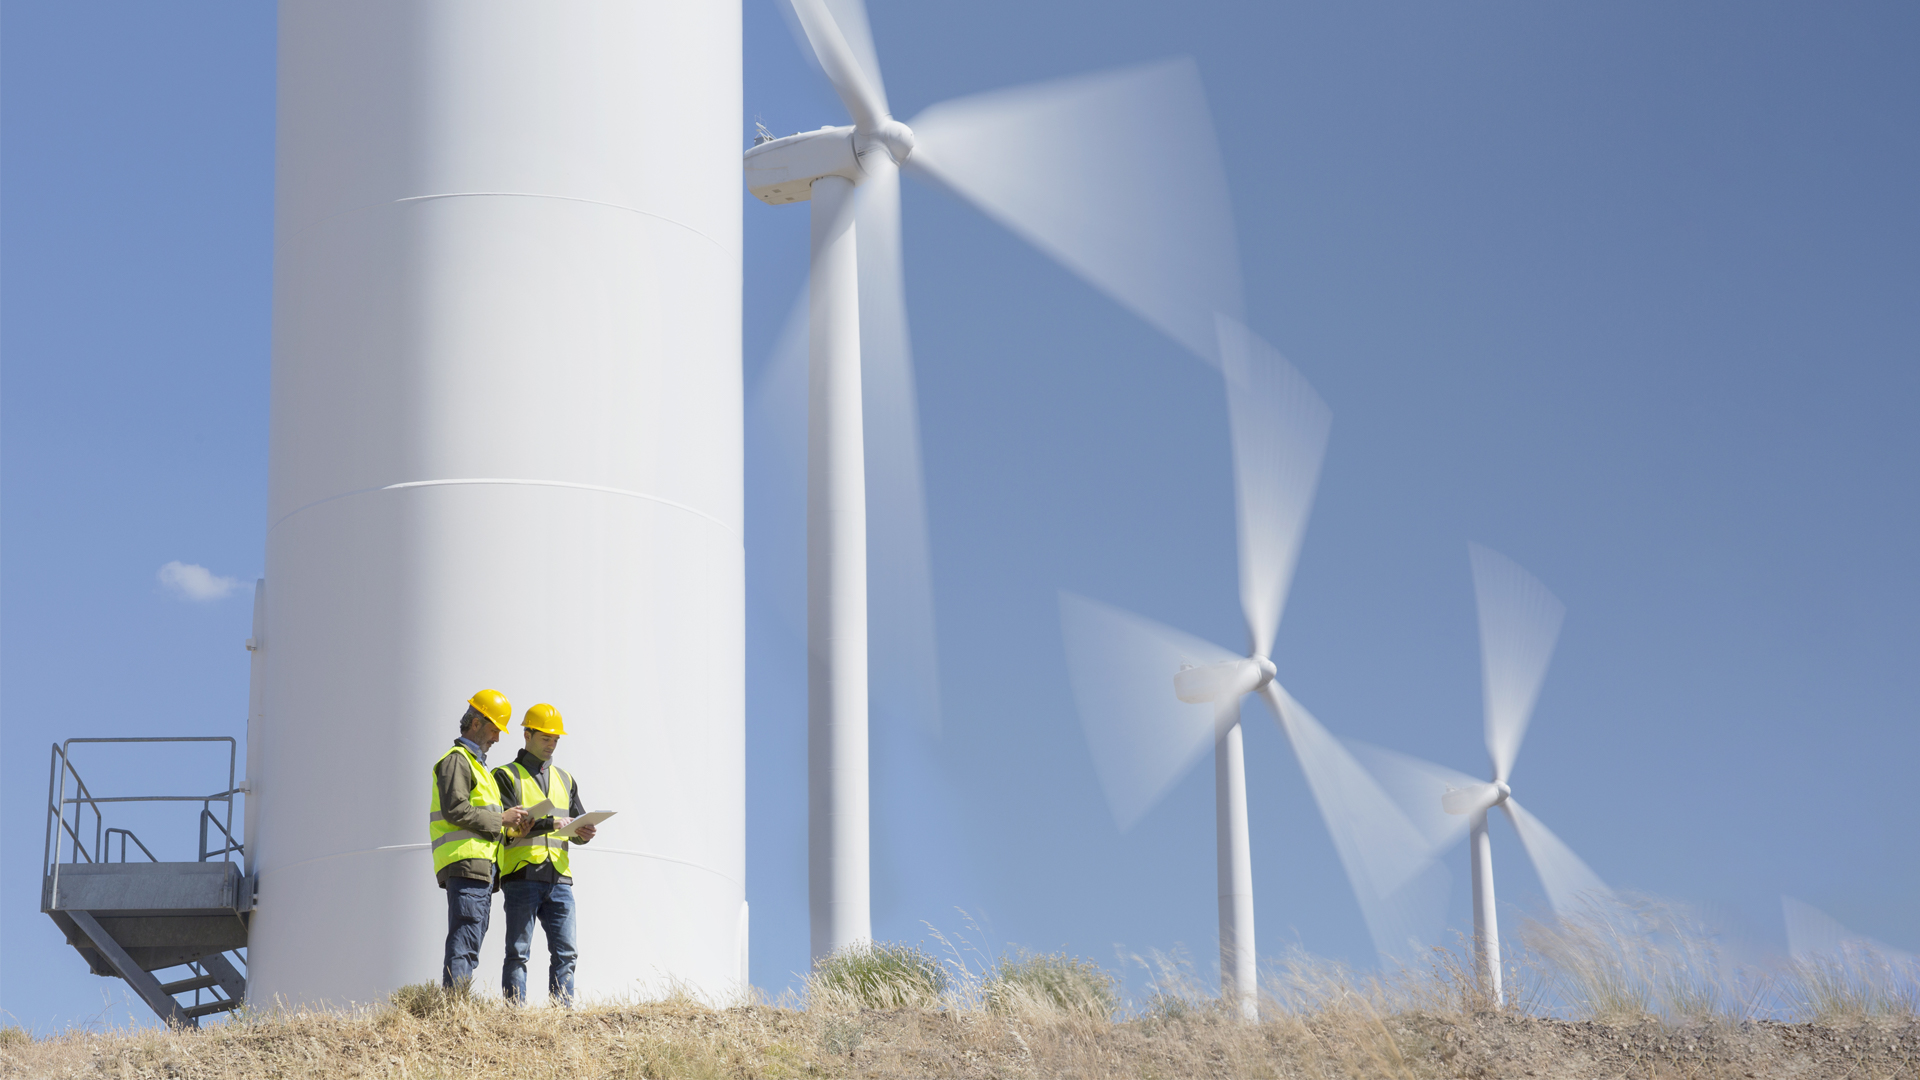 Workers Talking By Wind Turbines in Rural Landscape Image for Hero Box